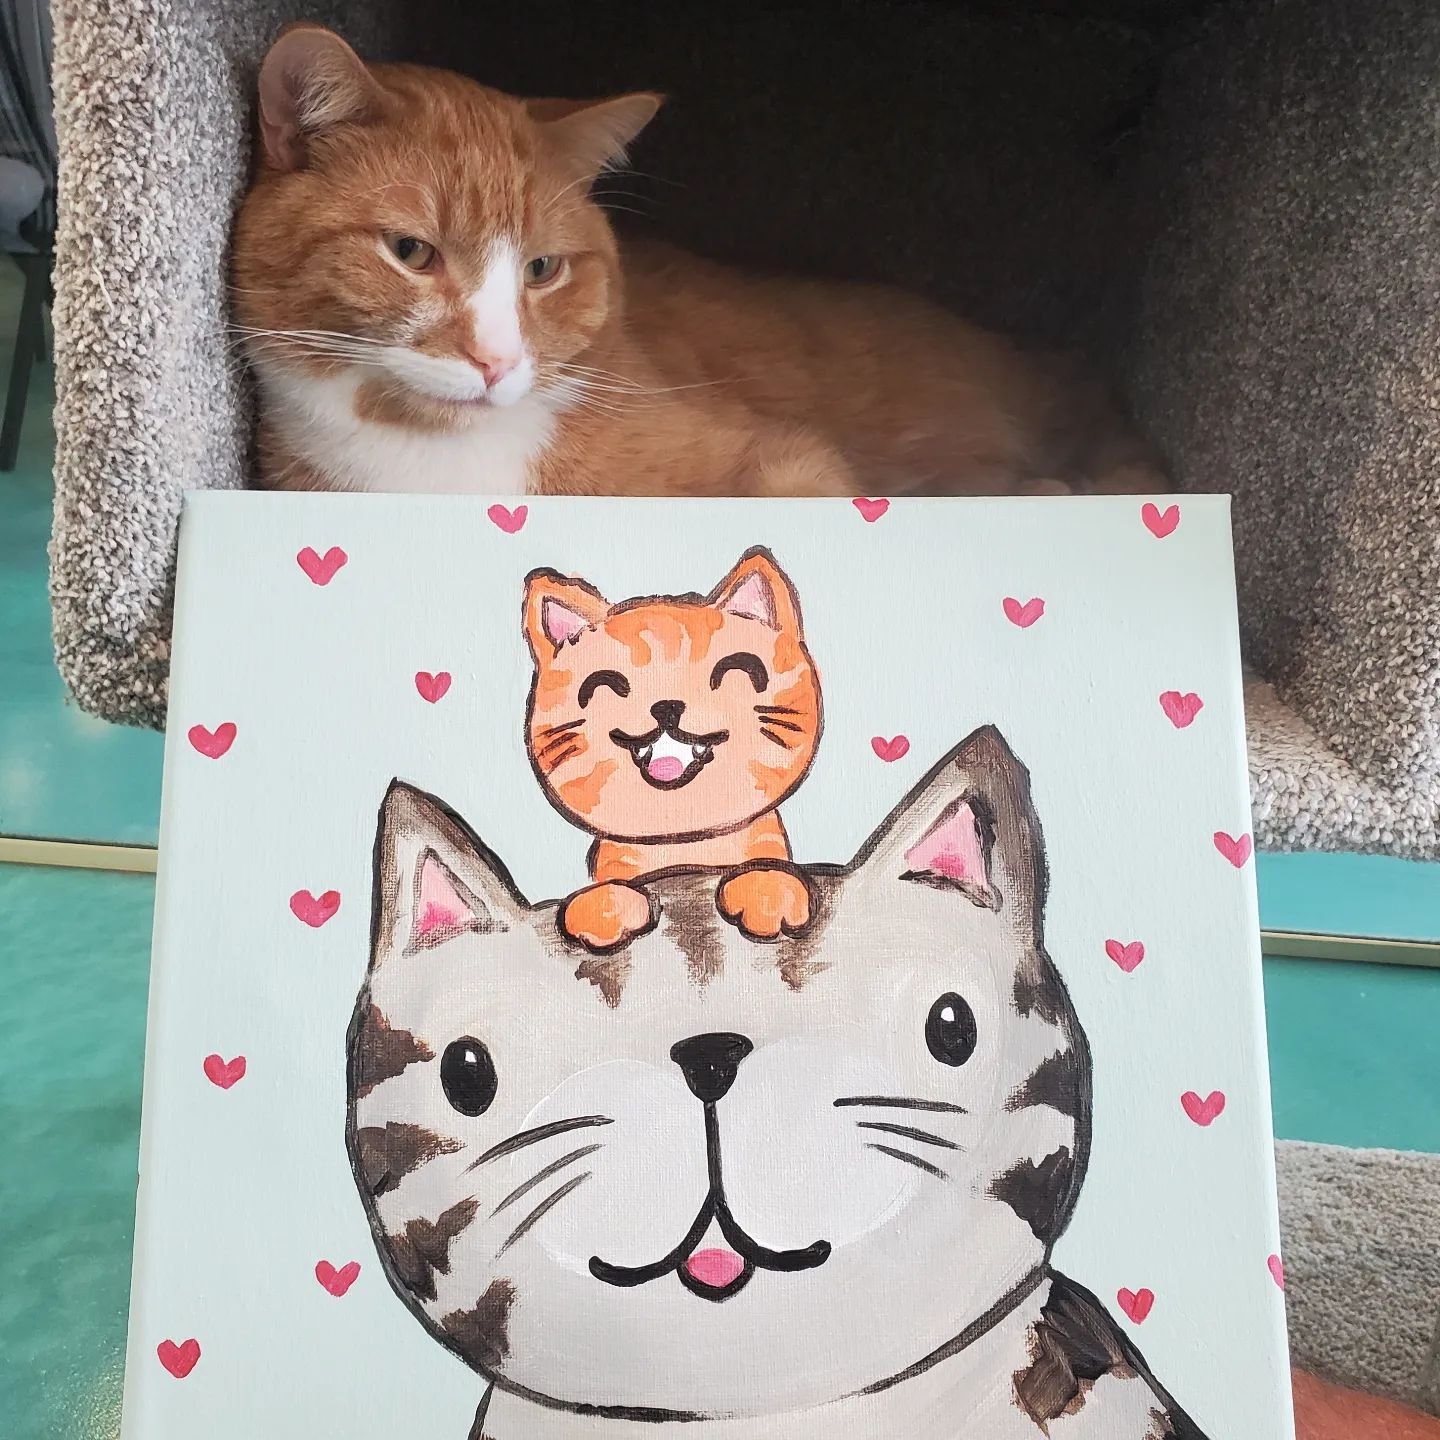 Drumstick wanted to let you all know about our special Mother's Day paint night happening on May 13th.
The painting features a cute 'mom and me' design, all supplies are included, plus helpful instruction from @calgarychalkartist. Book your tickets o